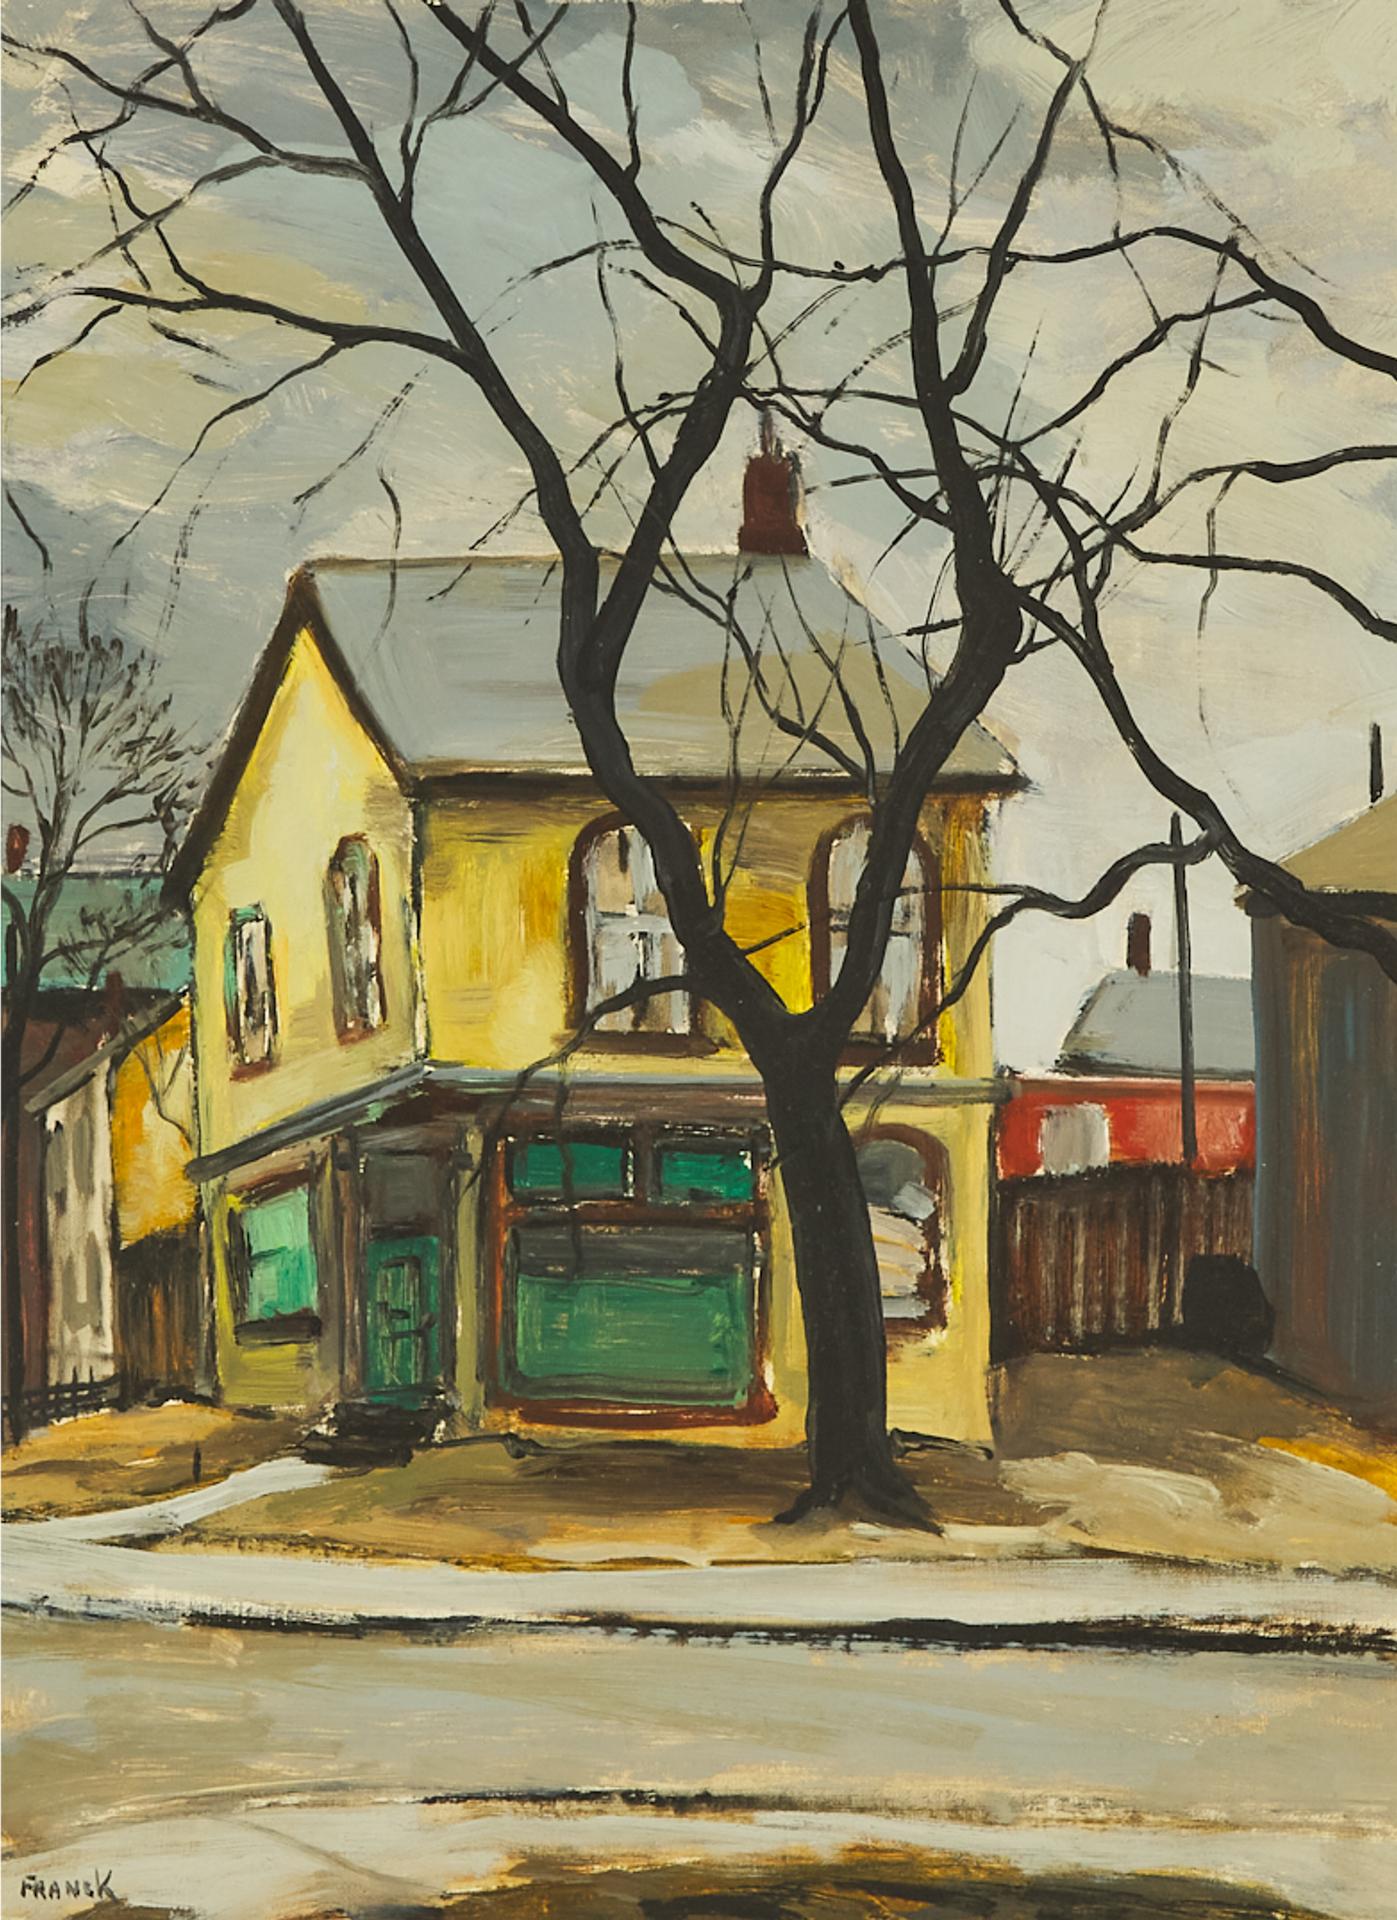 Albert Jacques Franck (1899-1973) - Edward And Centre Streets